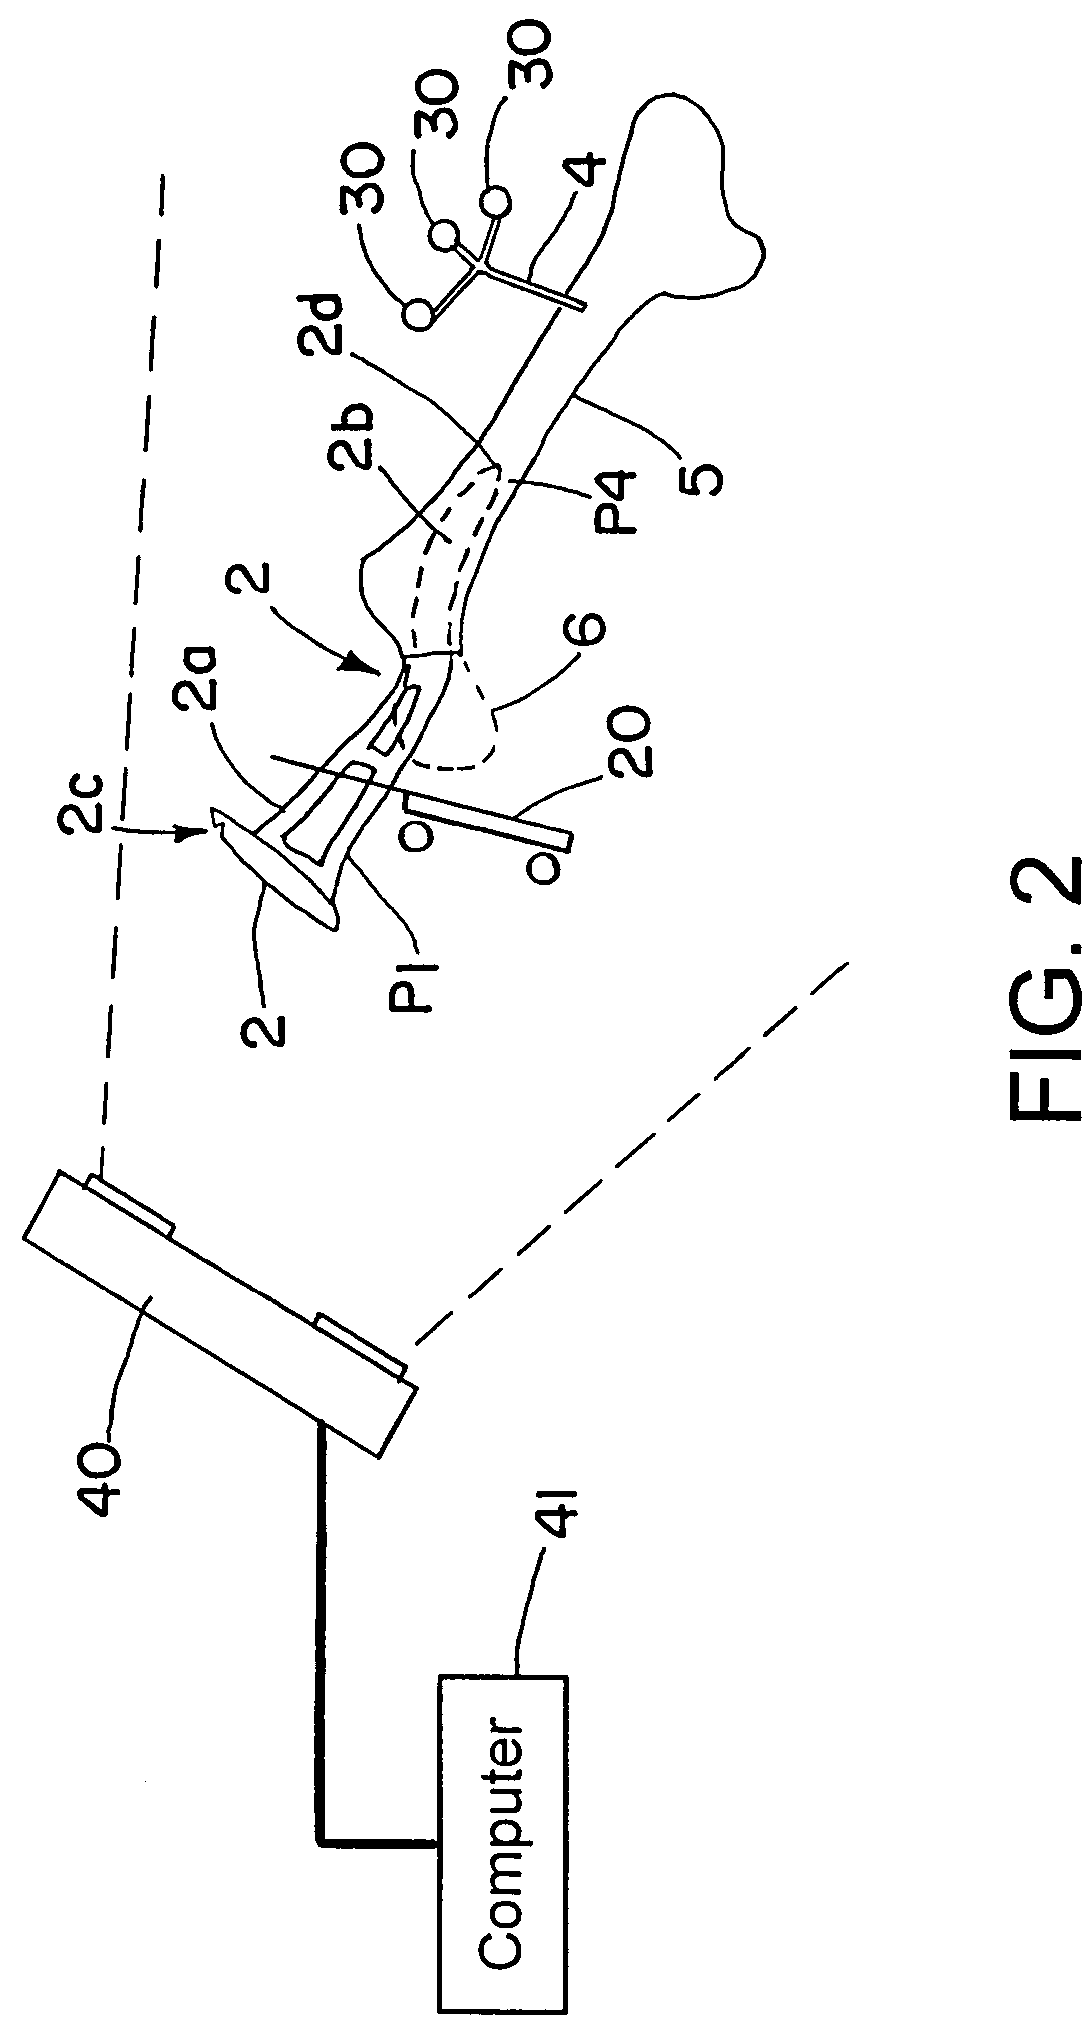 Method and system for determining the location of a medical instrument relative to a body structure